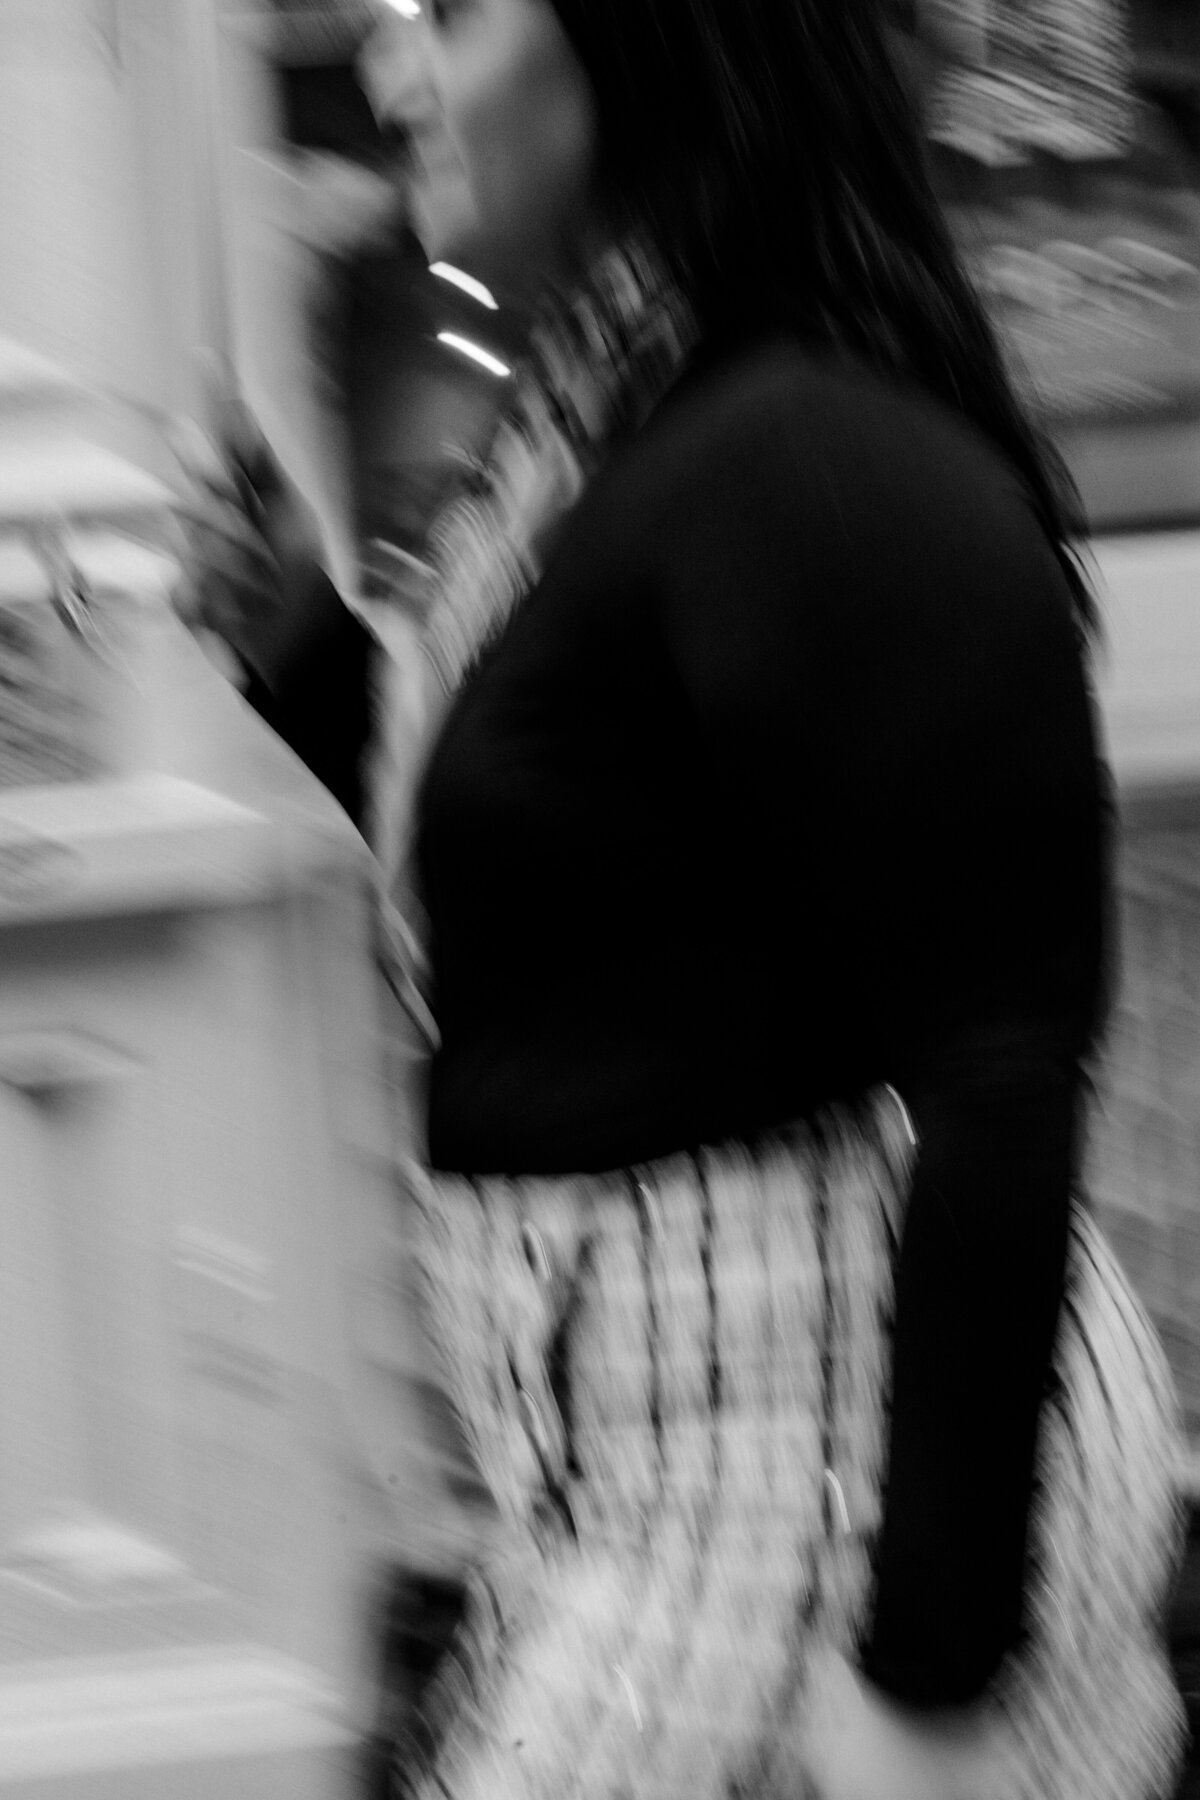 blurry black and white image of a woman walking